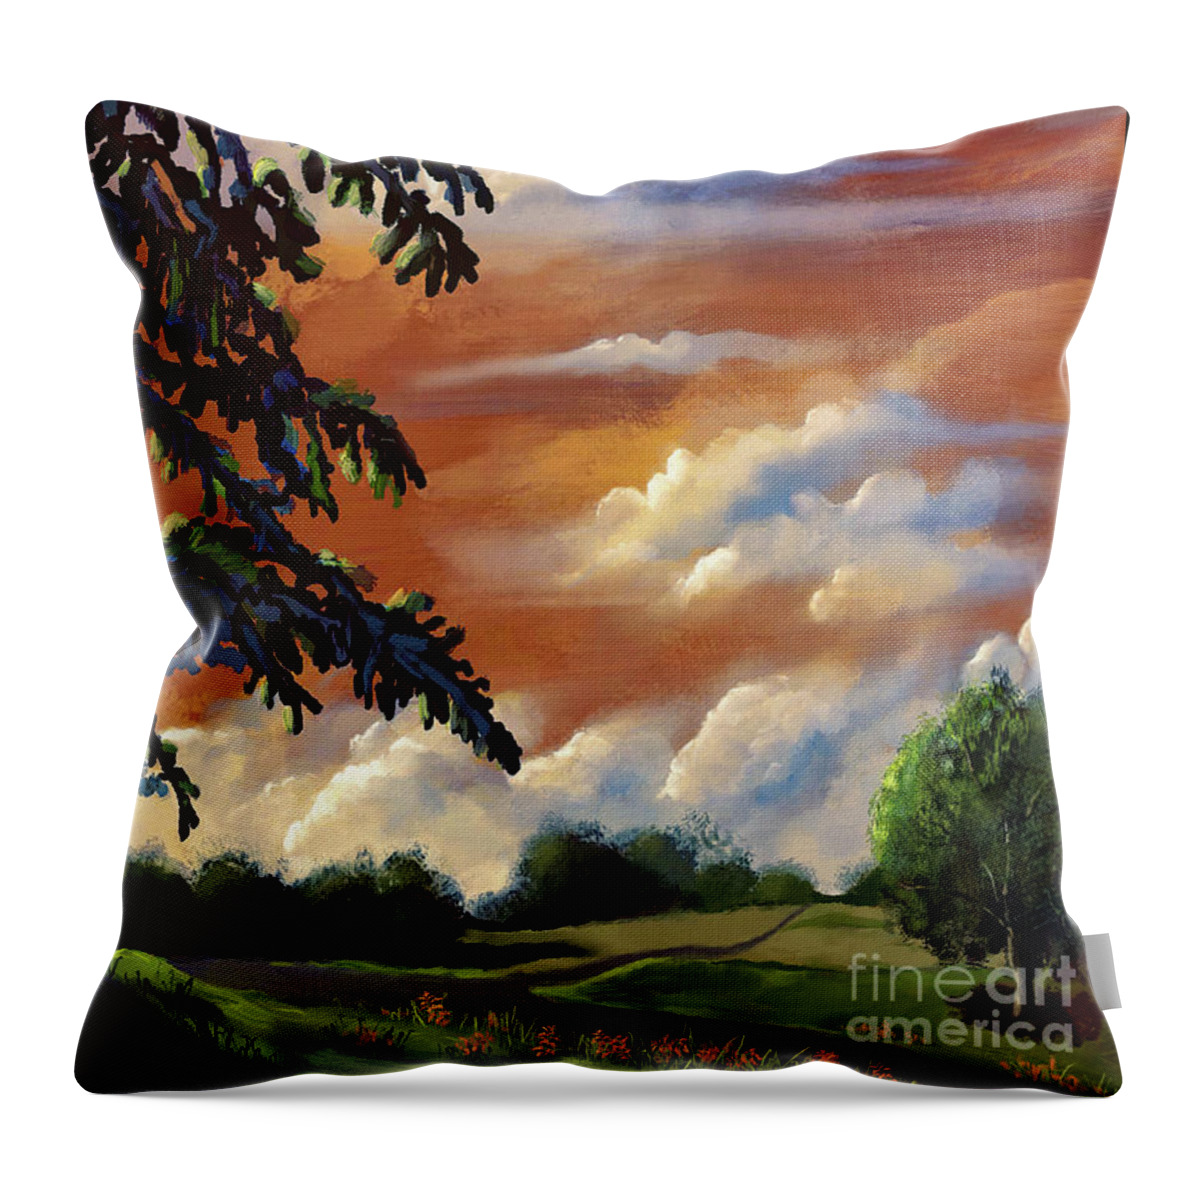 Sunset Throw Pillow featuring the digital art Taking A Stroll At Dusk by Lois Bryan